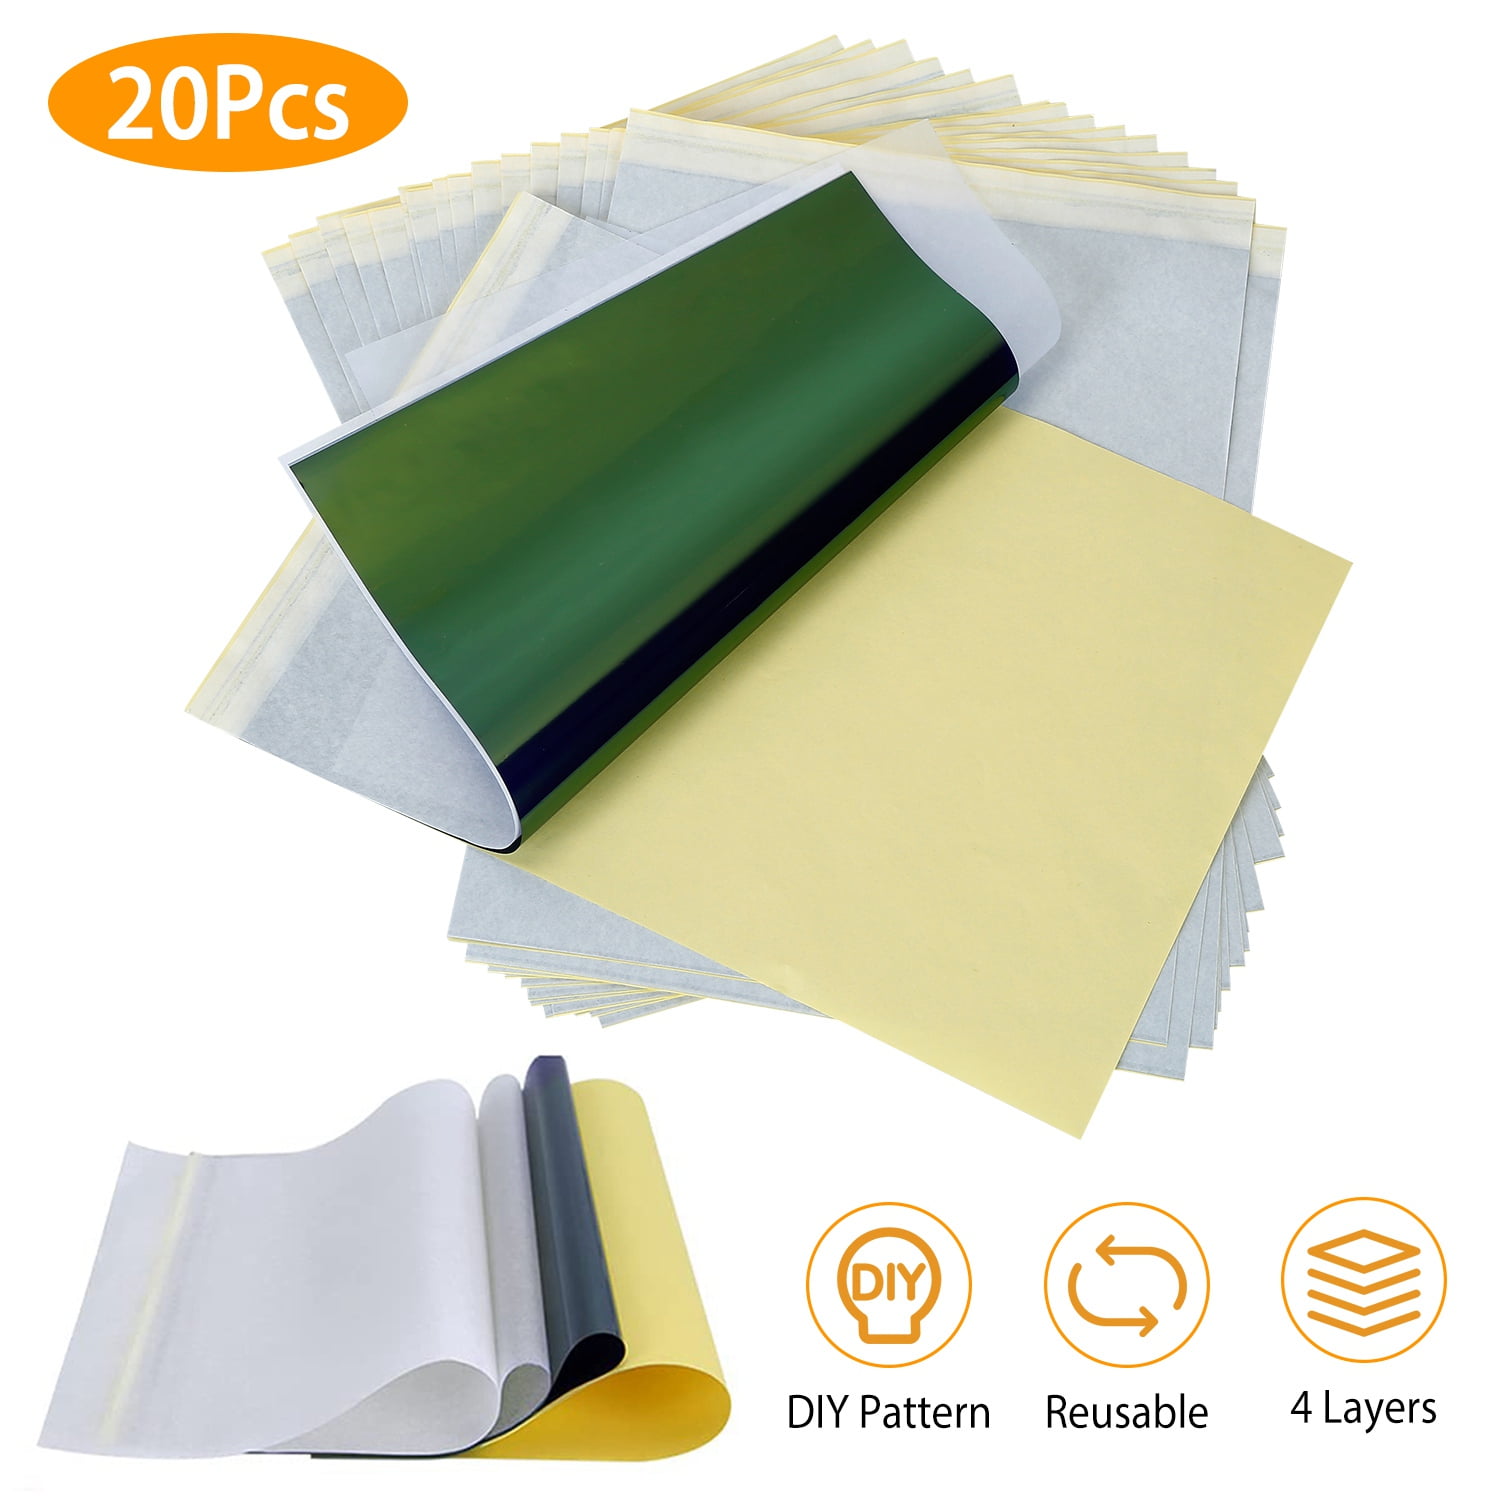  30PCS Tattoo Transfer Paper, Tattoo Template Transfer Paper,  Thermal Template Paper, tracing Paper, Tattoo Transfer Paper, which can be  Used for Thermal photocopiers or Freehand, Hand-Painted, etc